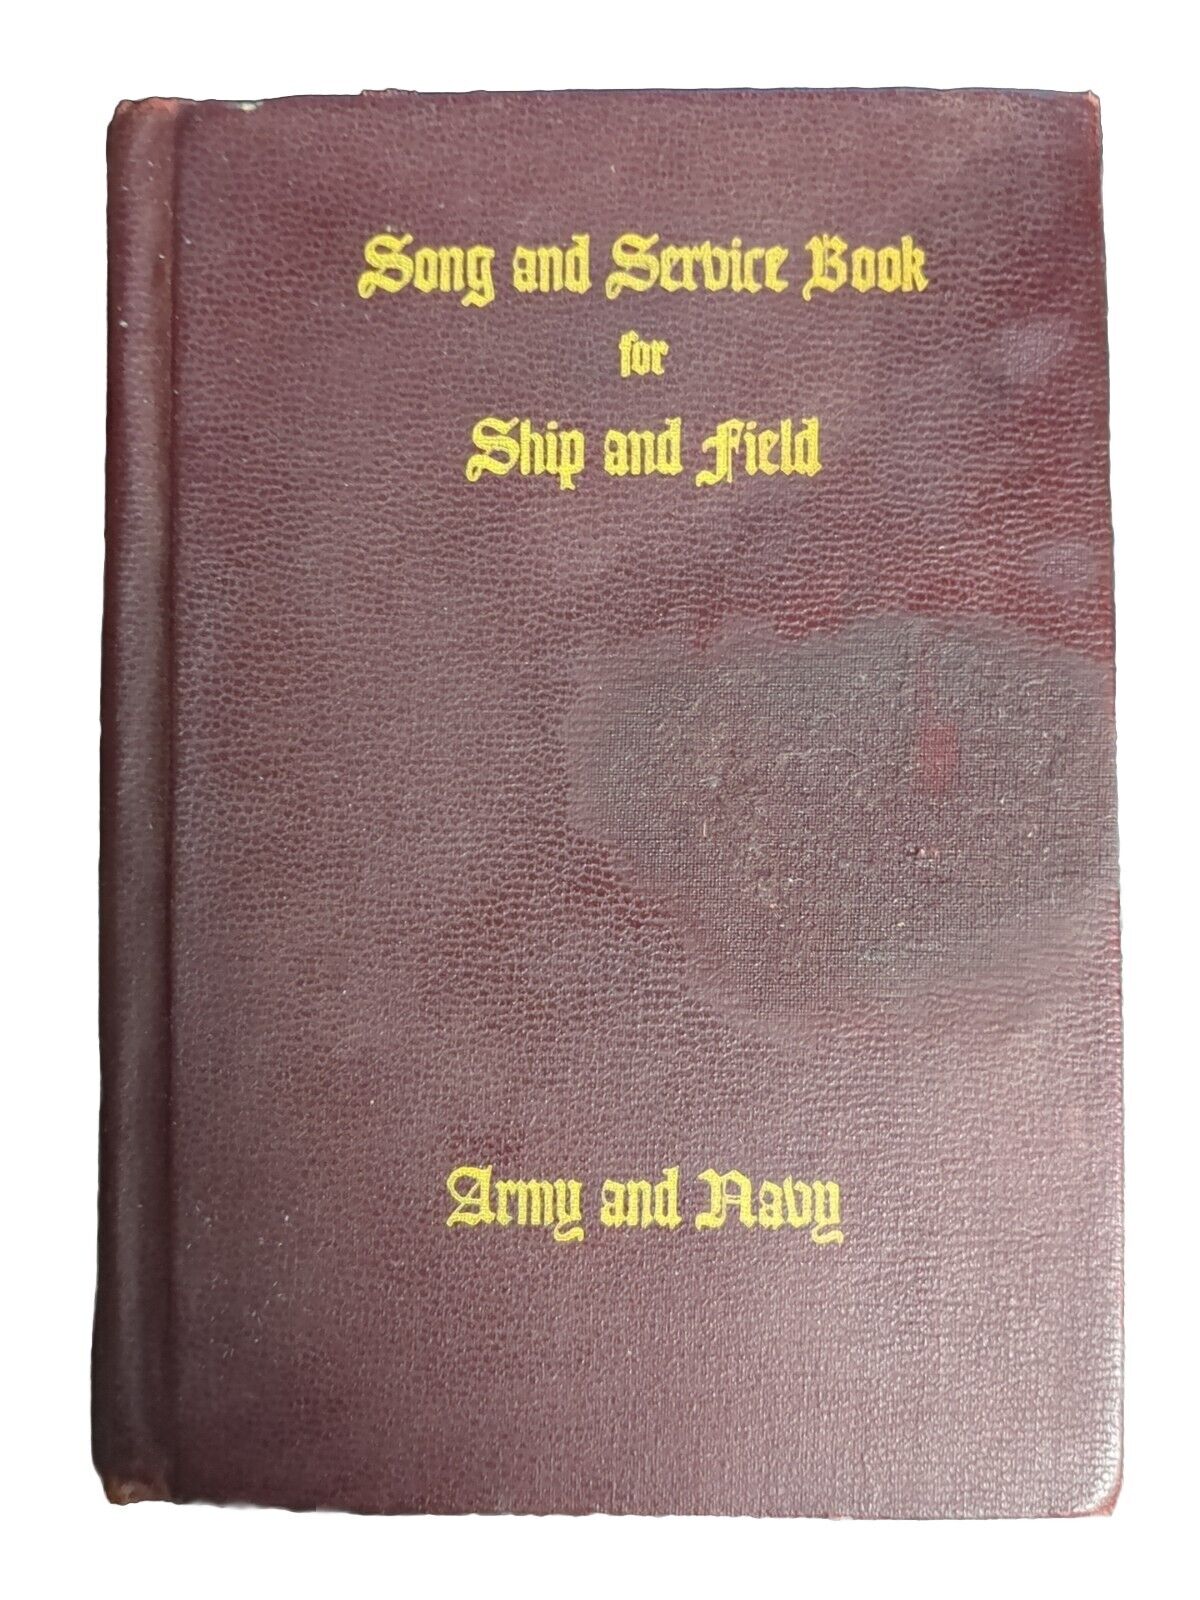 1942 Song And Service Book for Ship And Field Army And Navy WWll Vintage HC